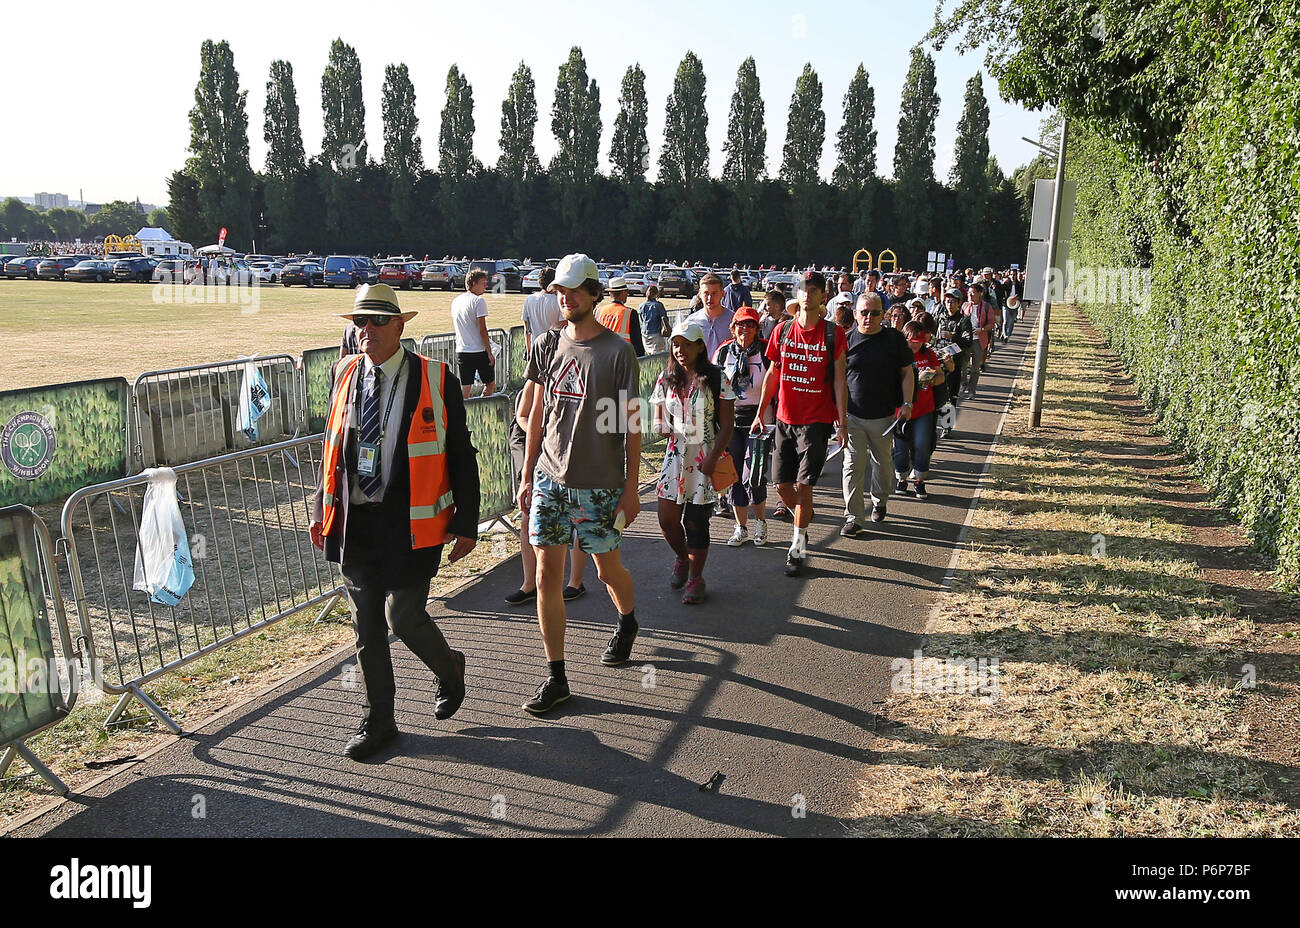 Darius Platt-Vowles, who is first in the queue, being led by a steward out of Wimbledon Park towards the main gate on day one of the Wimbledon Championships at the All England Lawn Tennis and Croquet Club, Wimbledon. Stock Photo